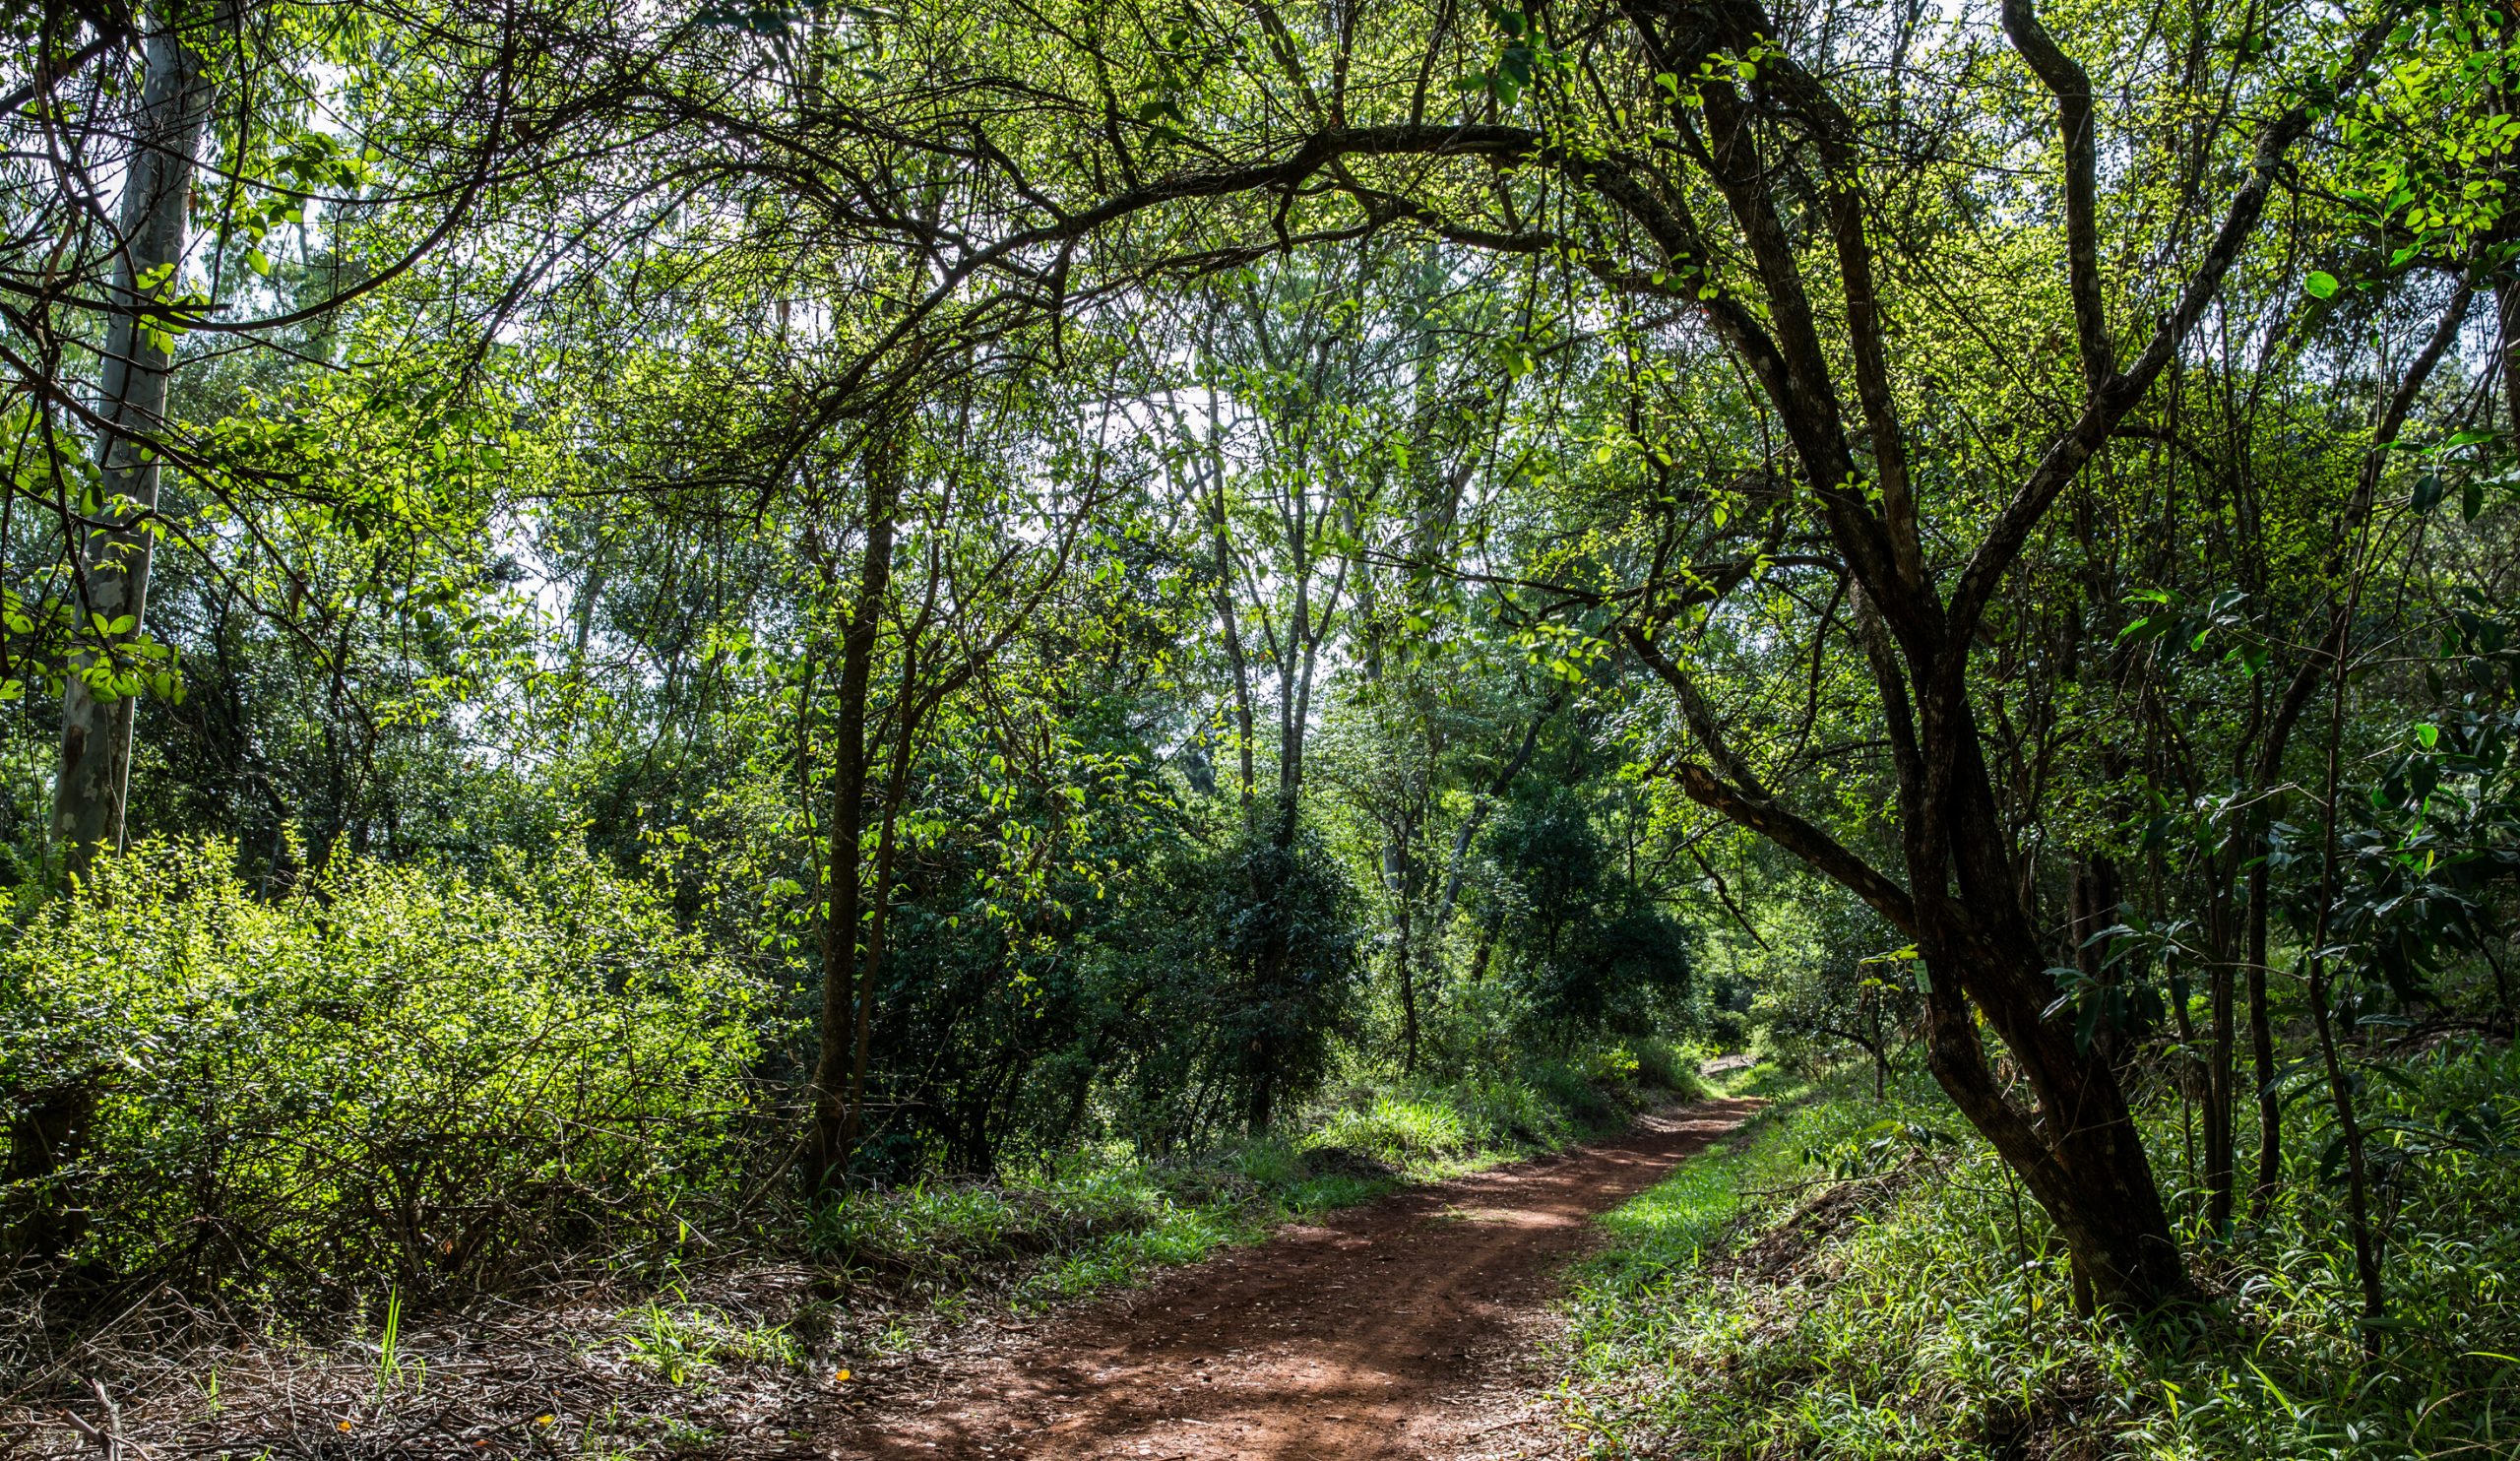 Karura Forest in Kenya, the Workout Forest